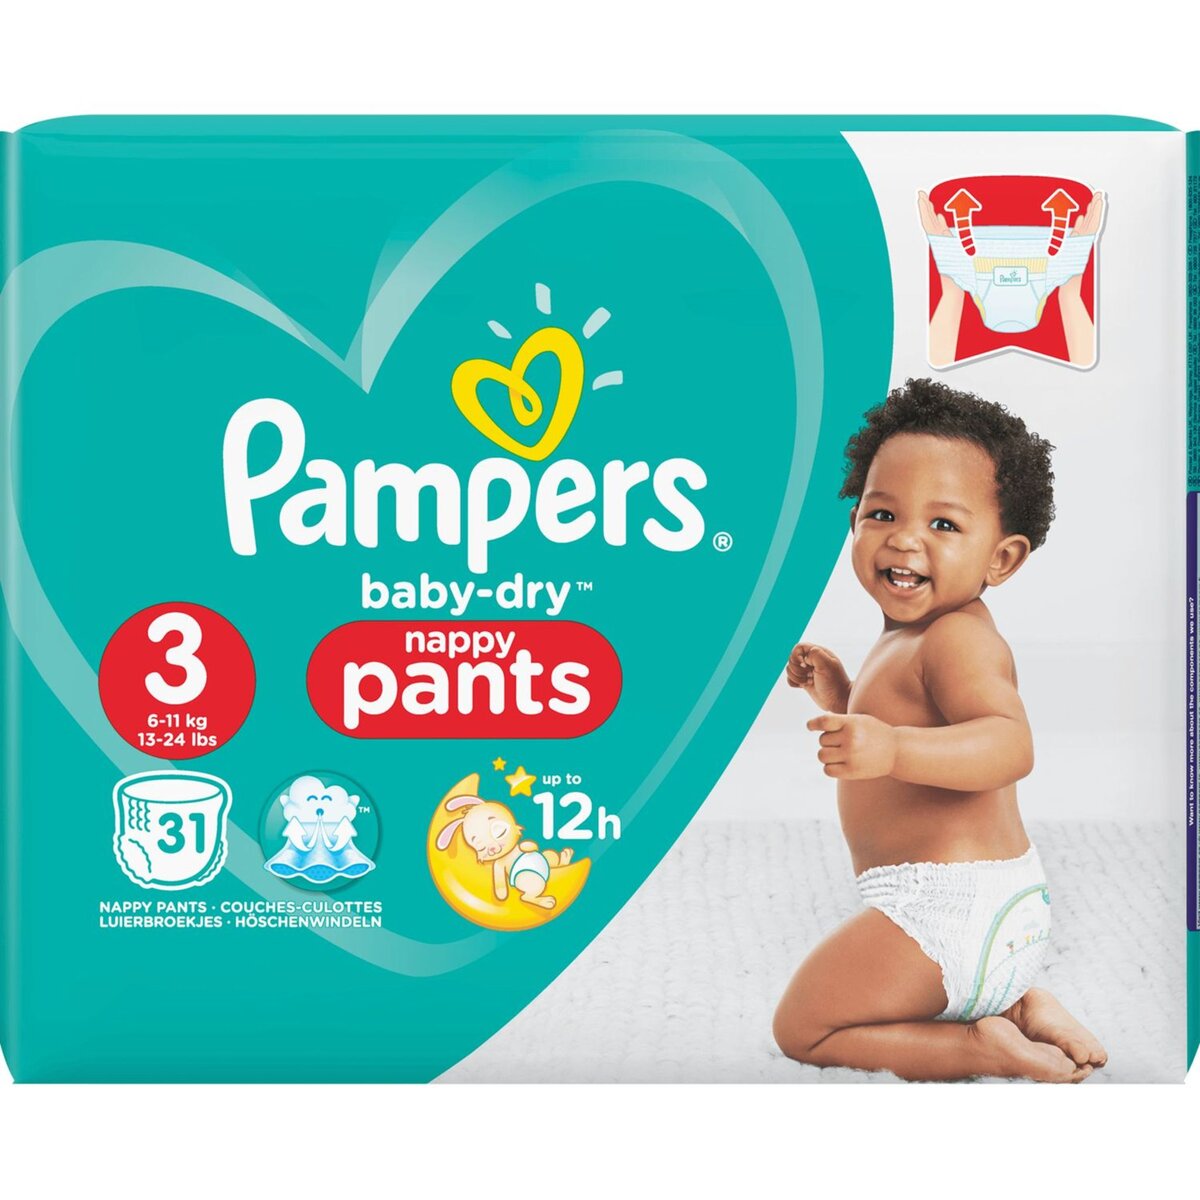 Pampers - Couches, taille 3 (6-10 kg), 31 pcs